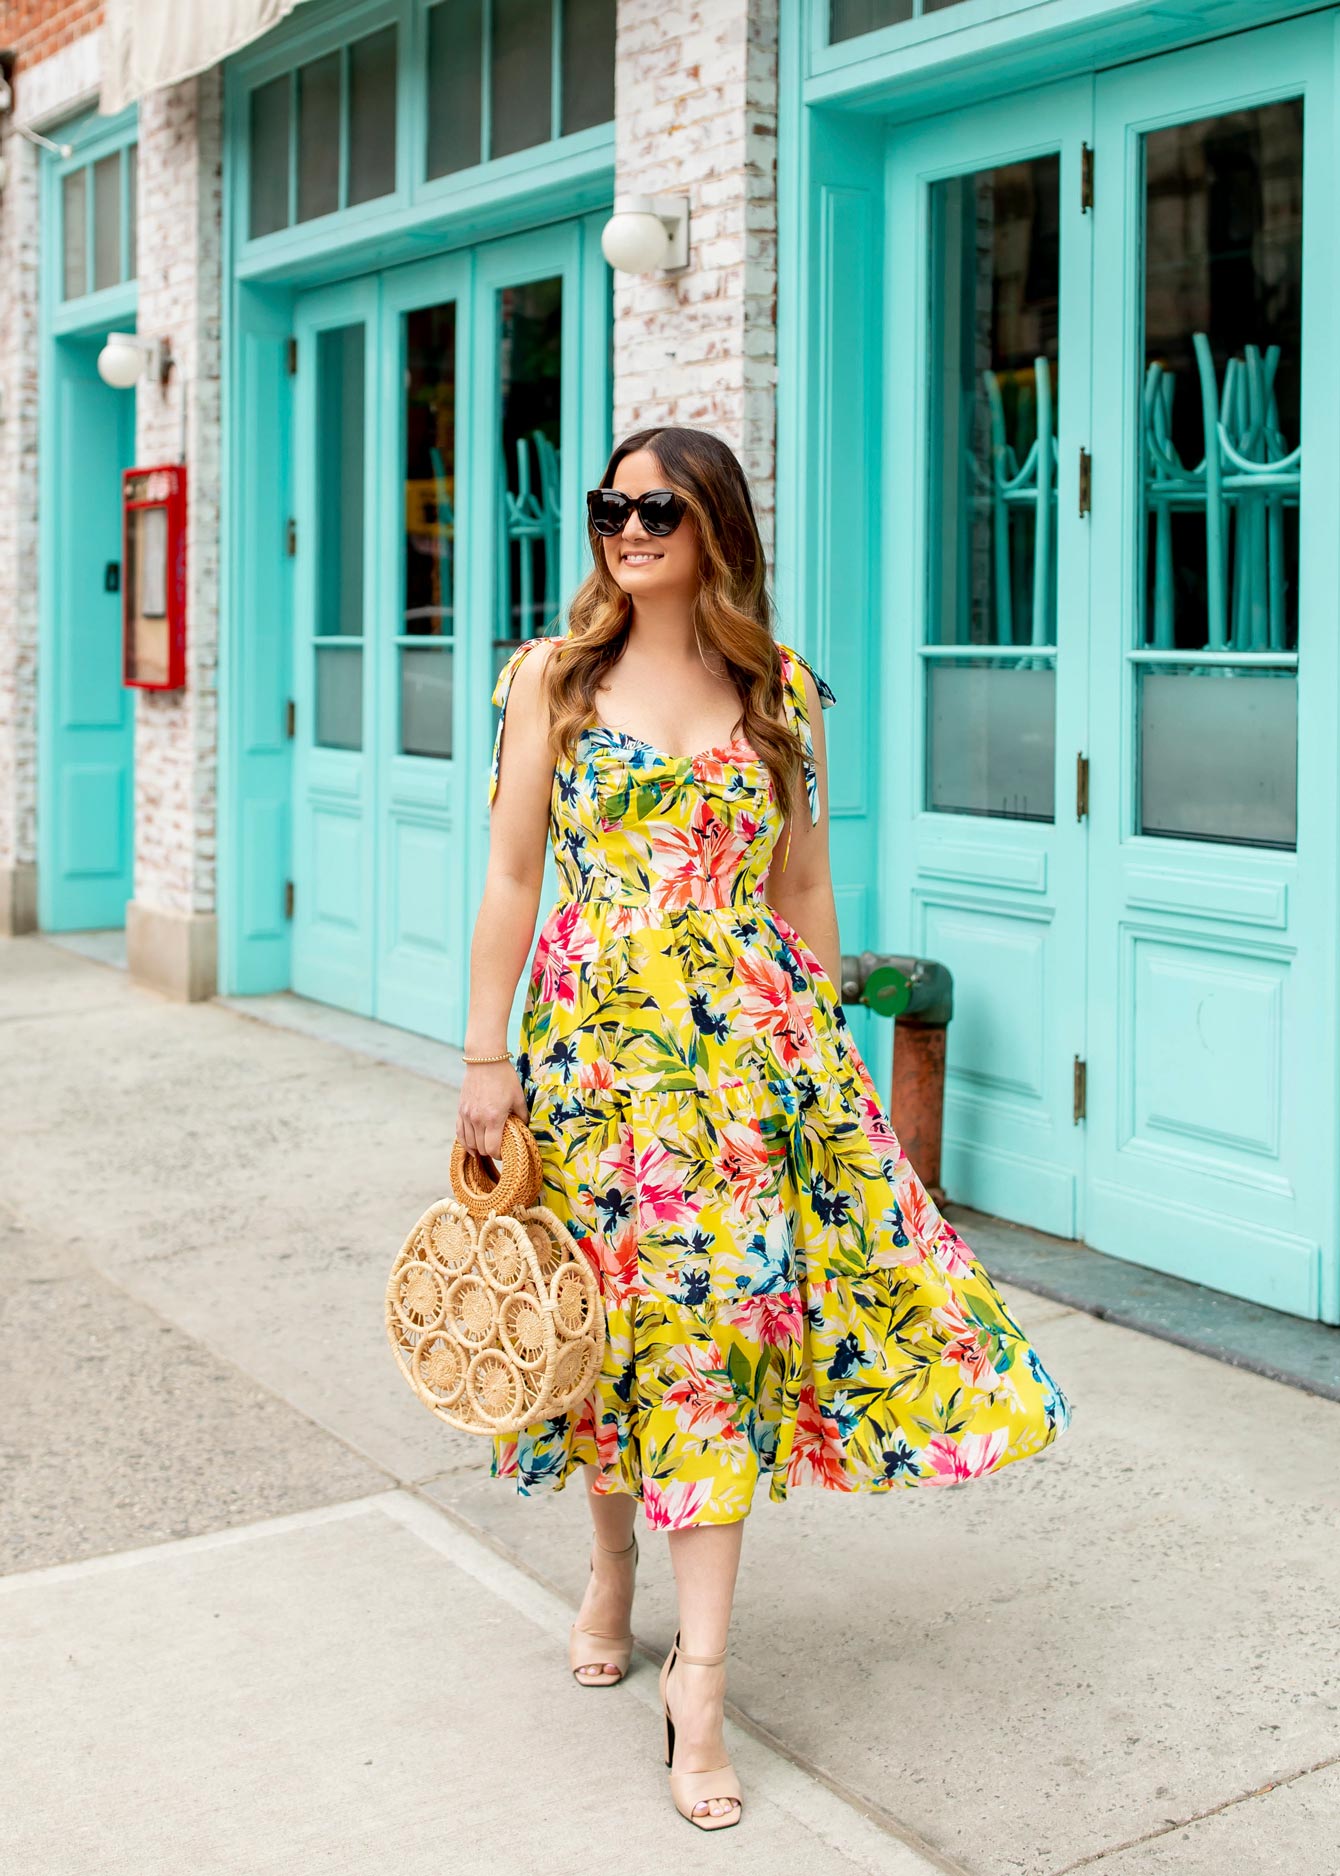 Eliza J Yellow Floral Midi Dress in New York City - Style Charade